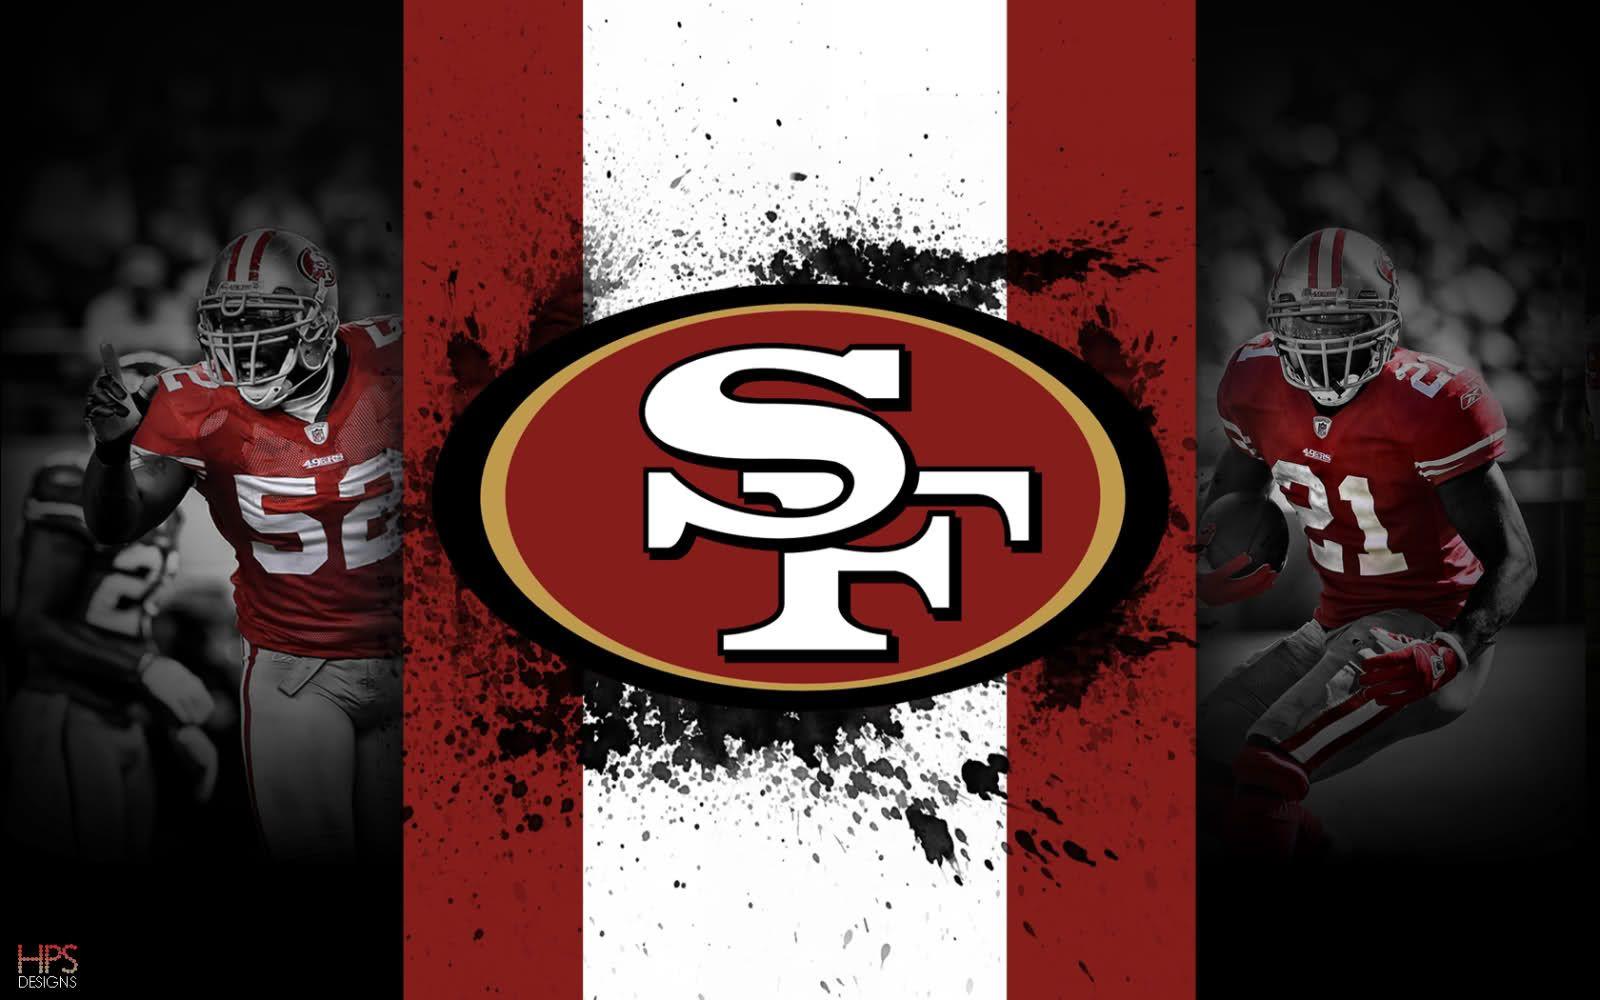 Iphone Wallpapers 49ers Wallpapers